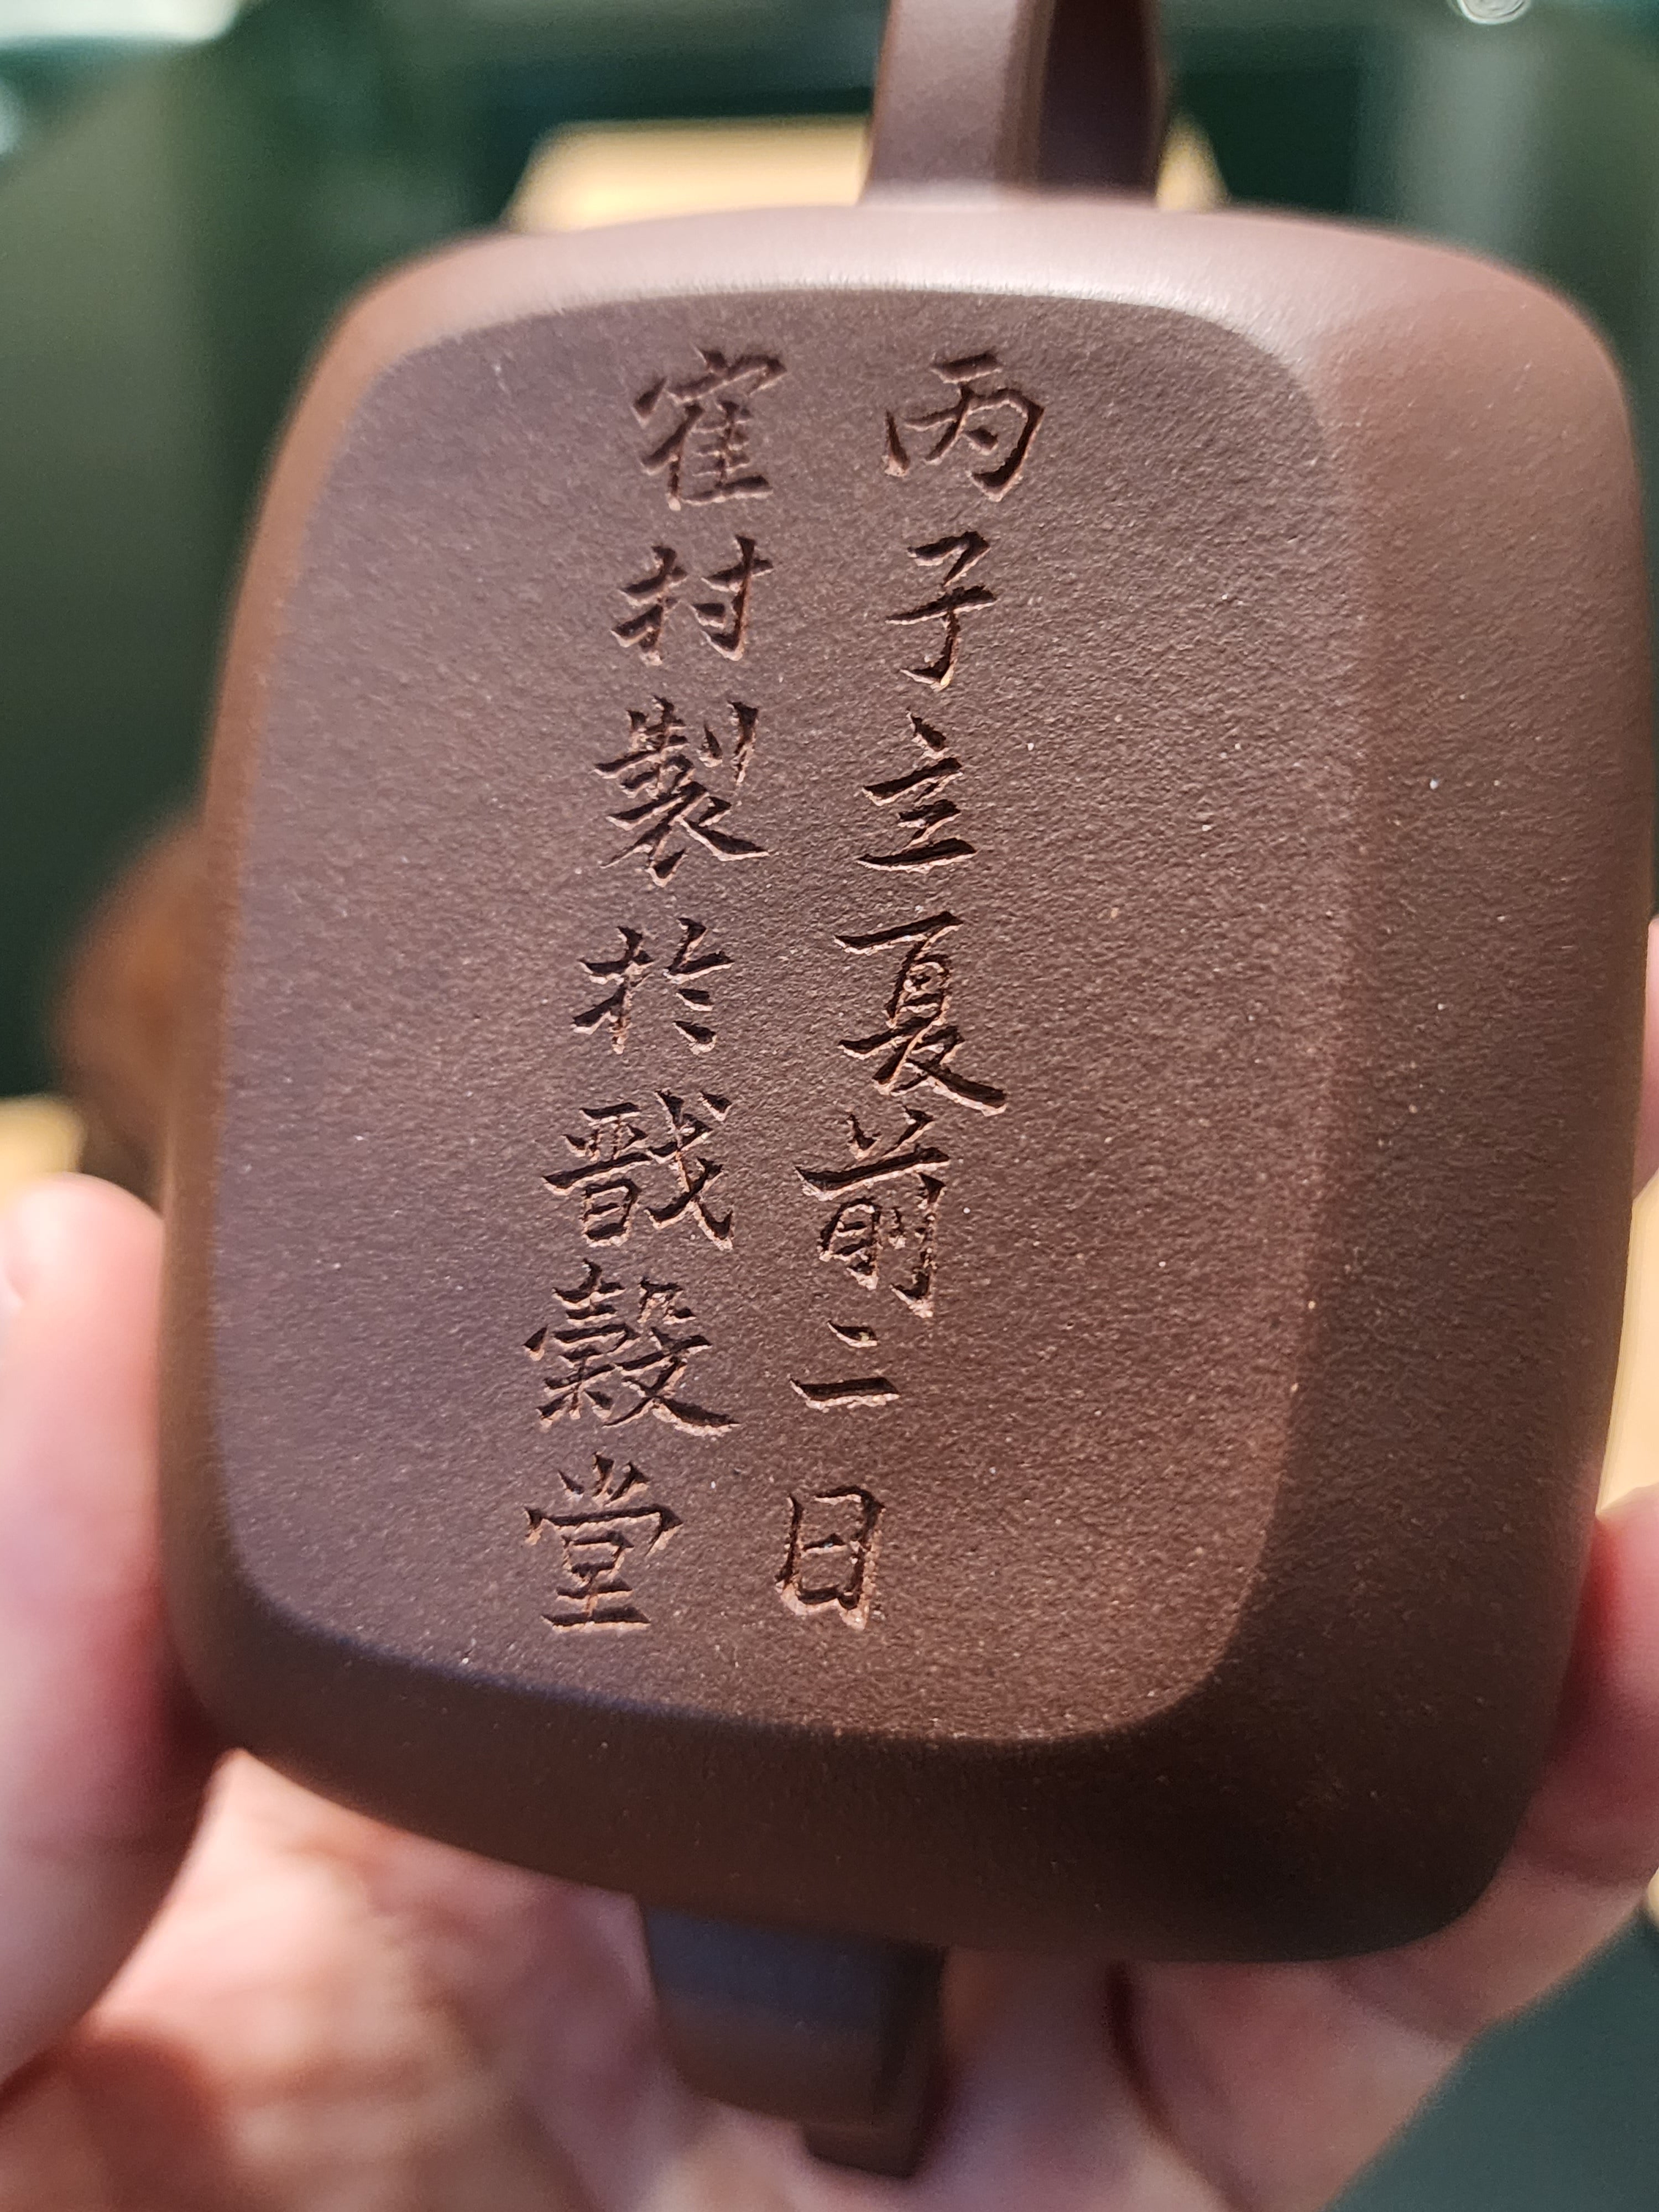 Ming Yuan Yin Bao 鸣远印包, made of the Nationally-Authenticated True 4th Quarry DiCaoQing 国家验证四号井底槽青, Huang Long Yuan certification, crafted by our L4 Assoc Master Yang Quan Sheng 杨全胜。2 Units ~ both sold, to our patrons in Finland and Vietnam.  Thank you!